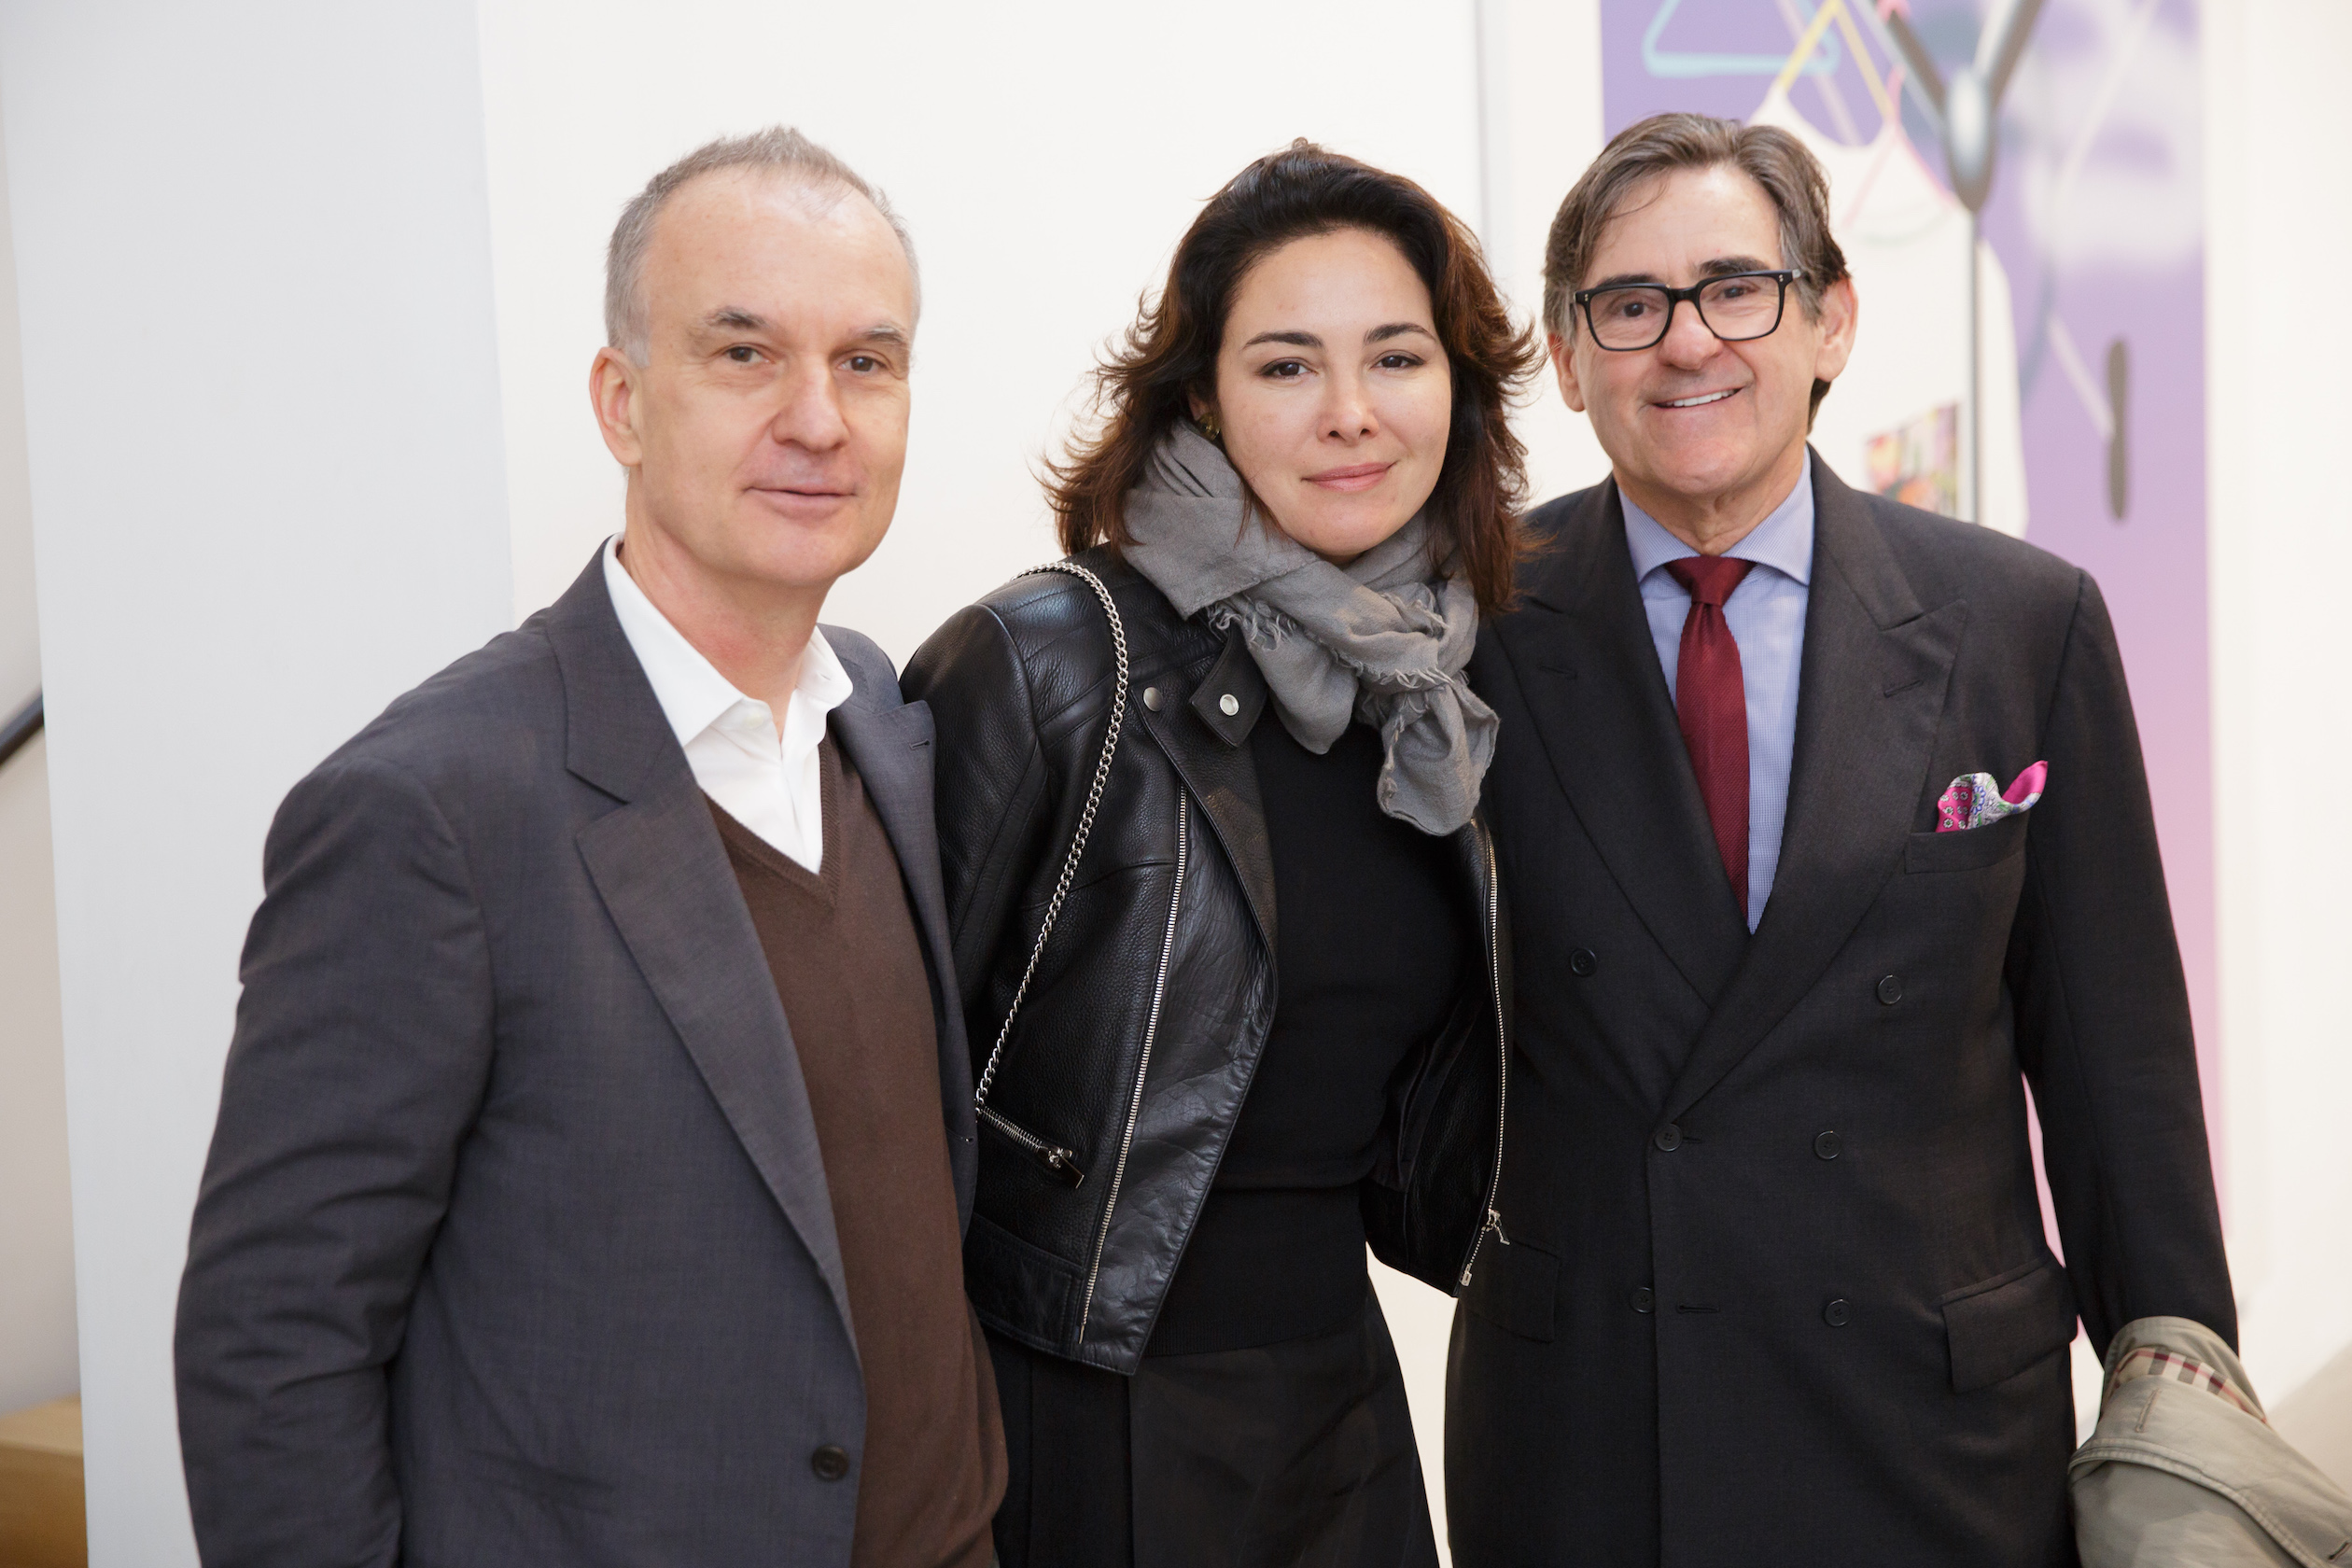 Lucretia Zappi, Lawrence Luhring, Peter Brant